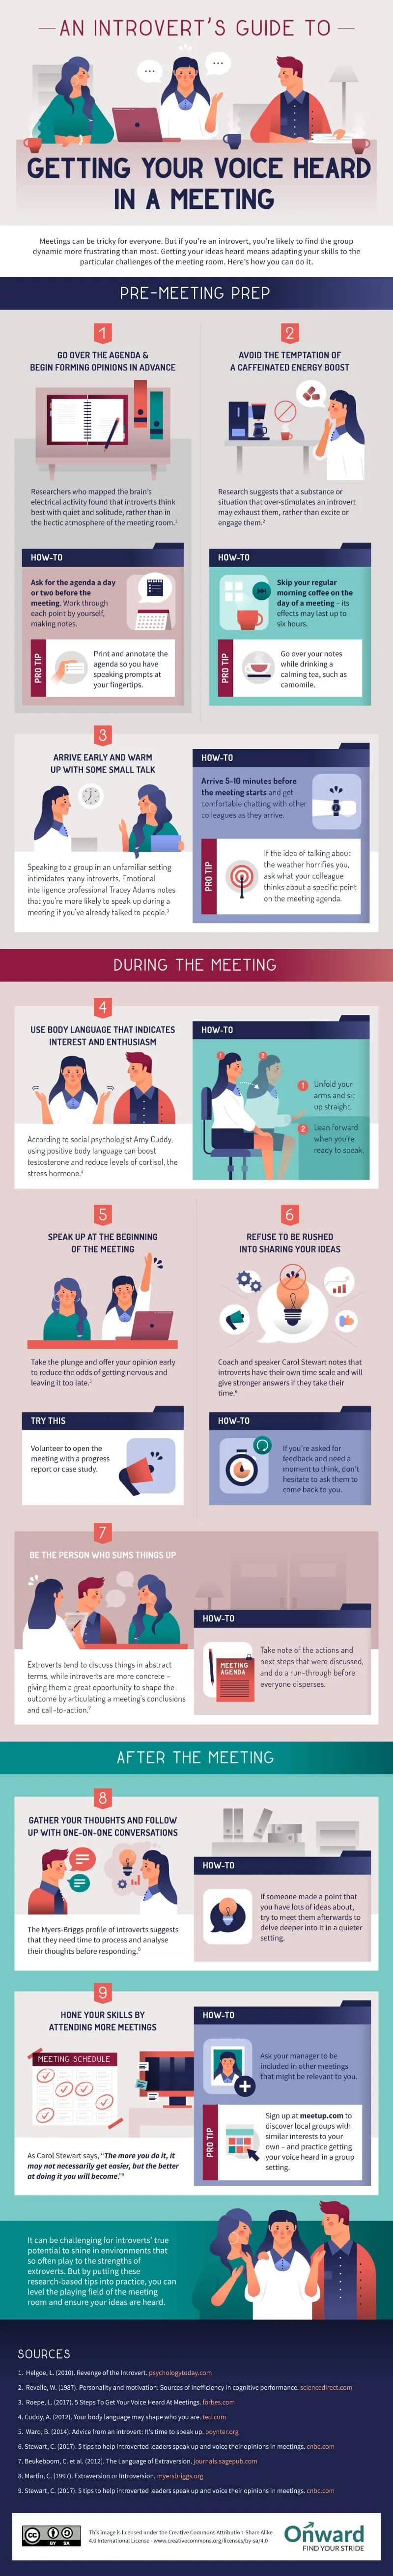 An Introvert's Guide to Getting Your Voice Heard in a Meeting - #infographic